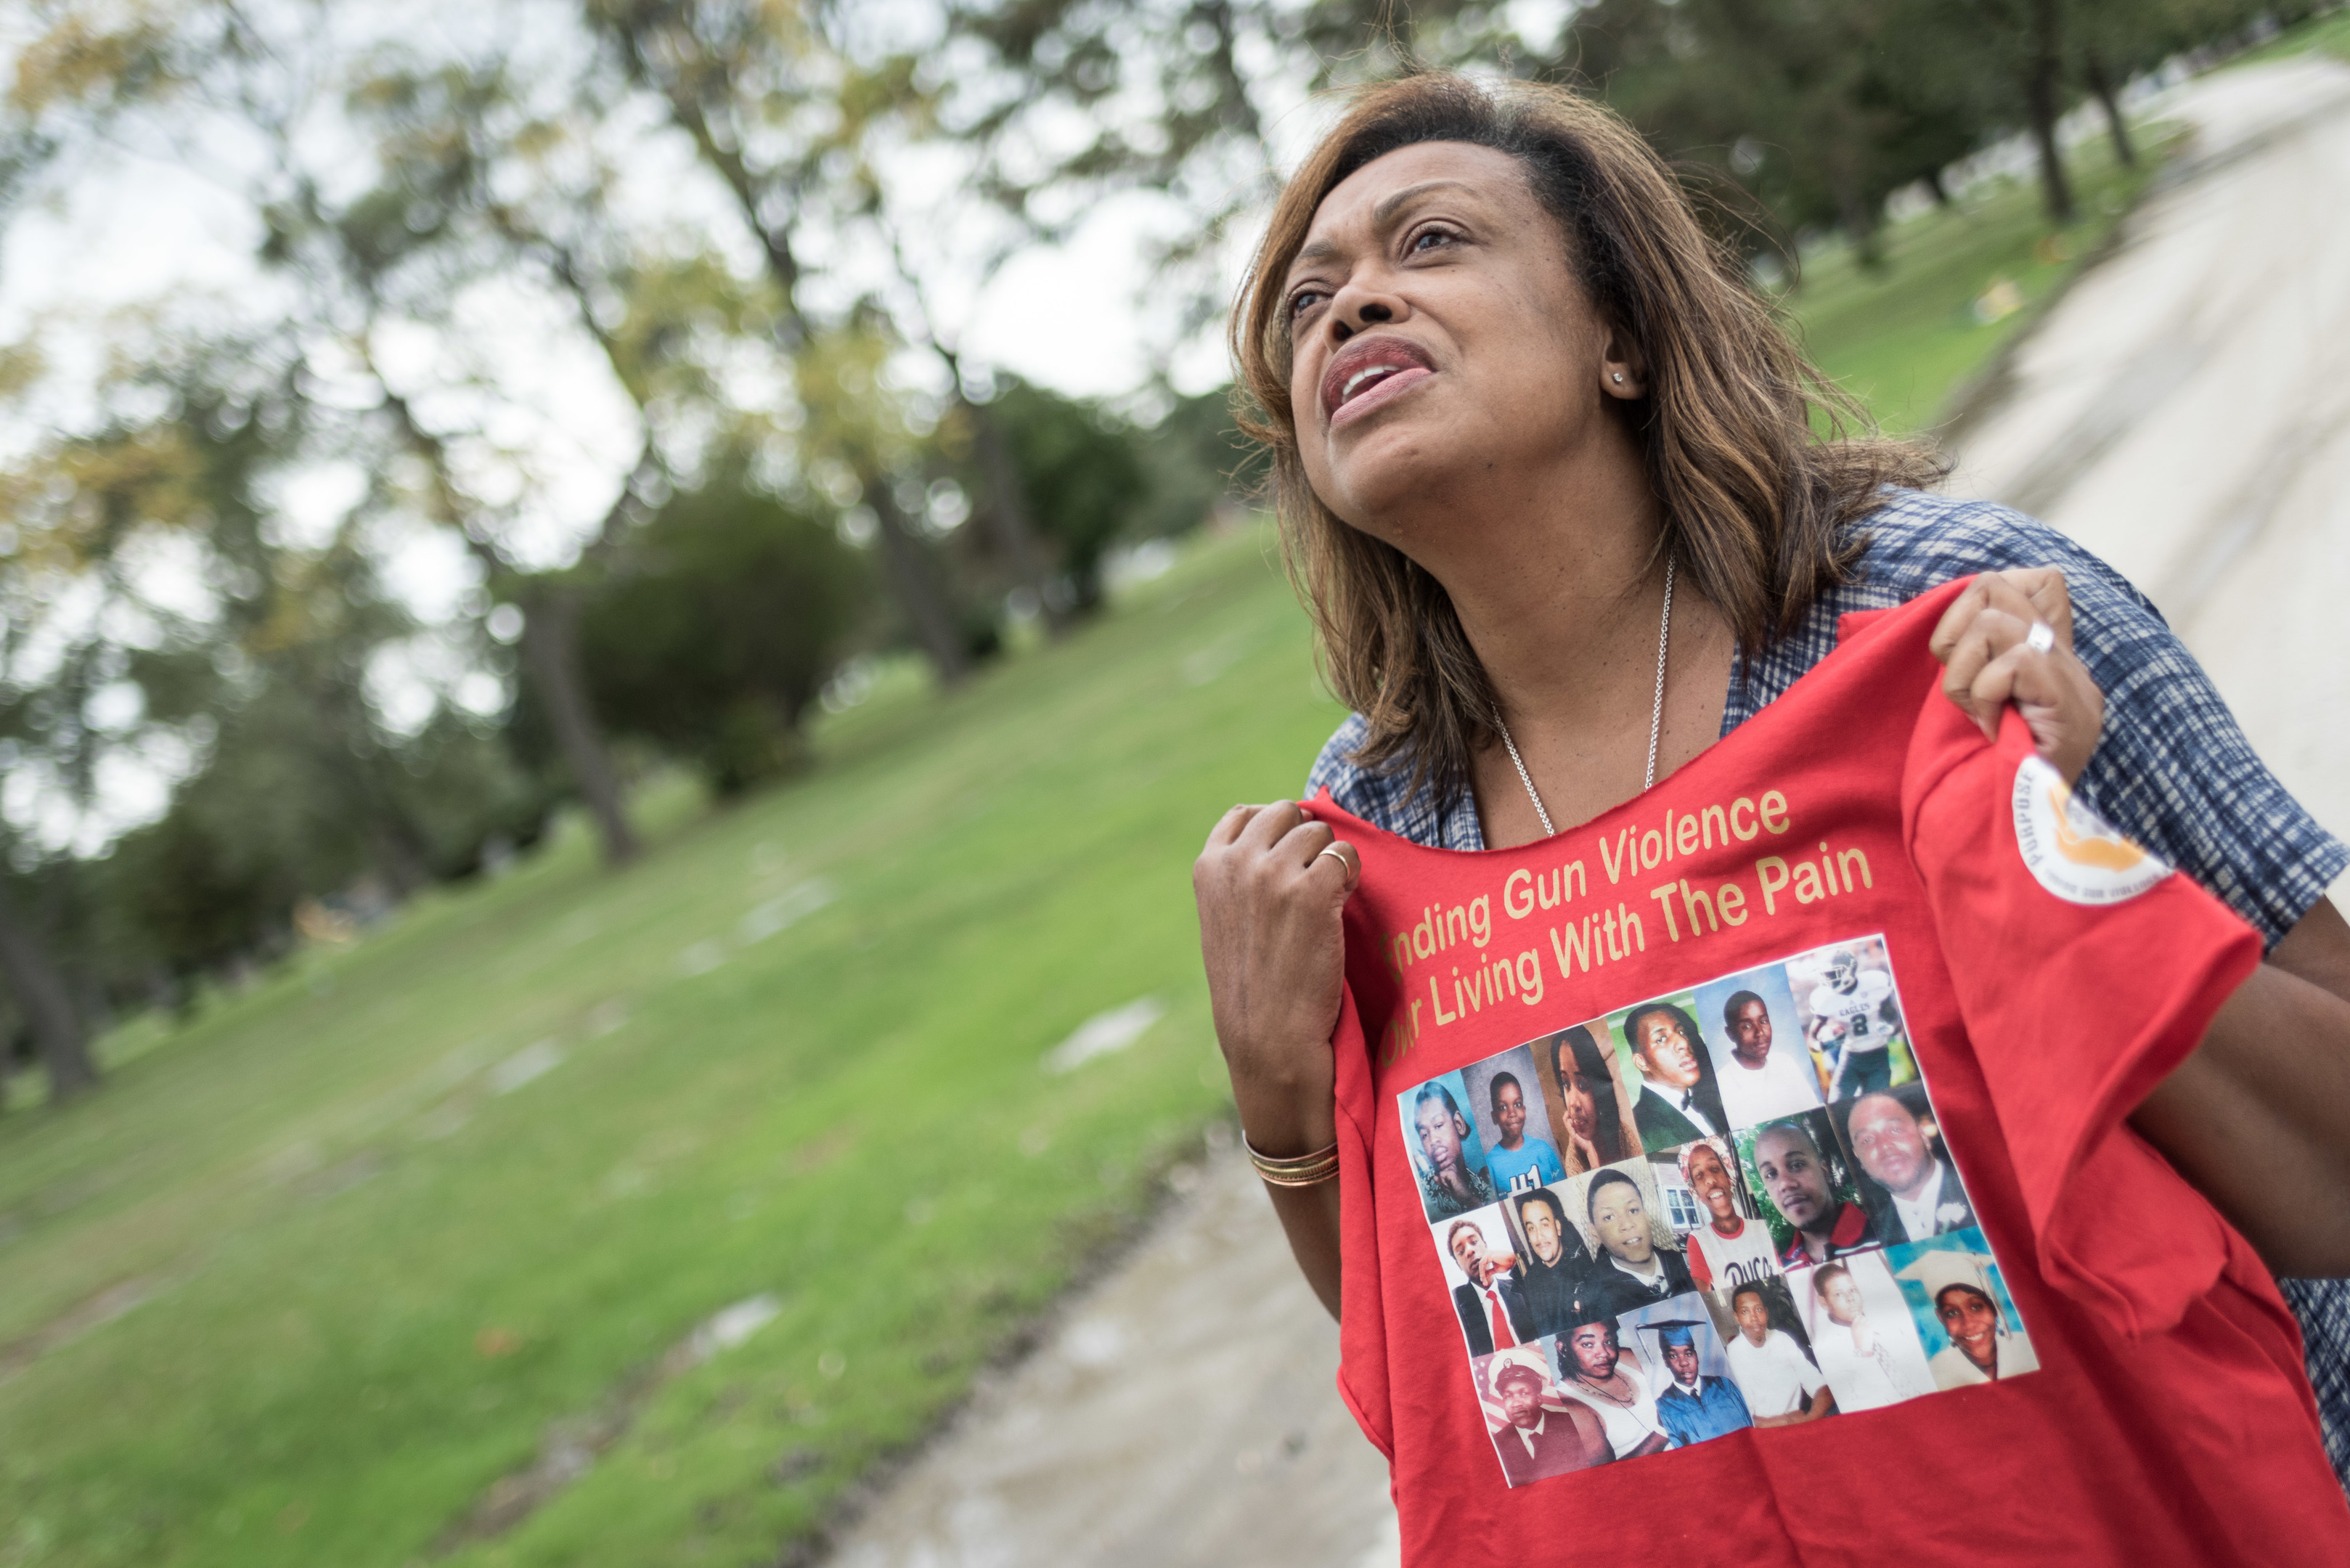 Gun violence prevention campaigner Marsha Lee of Chicago whose son Tommy was murdered in a random shooting in 2008. Chicago IL, 7 October 2016